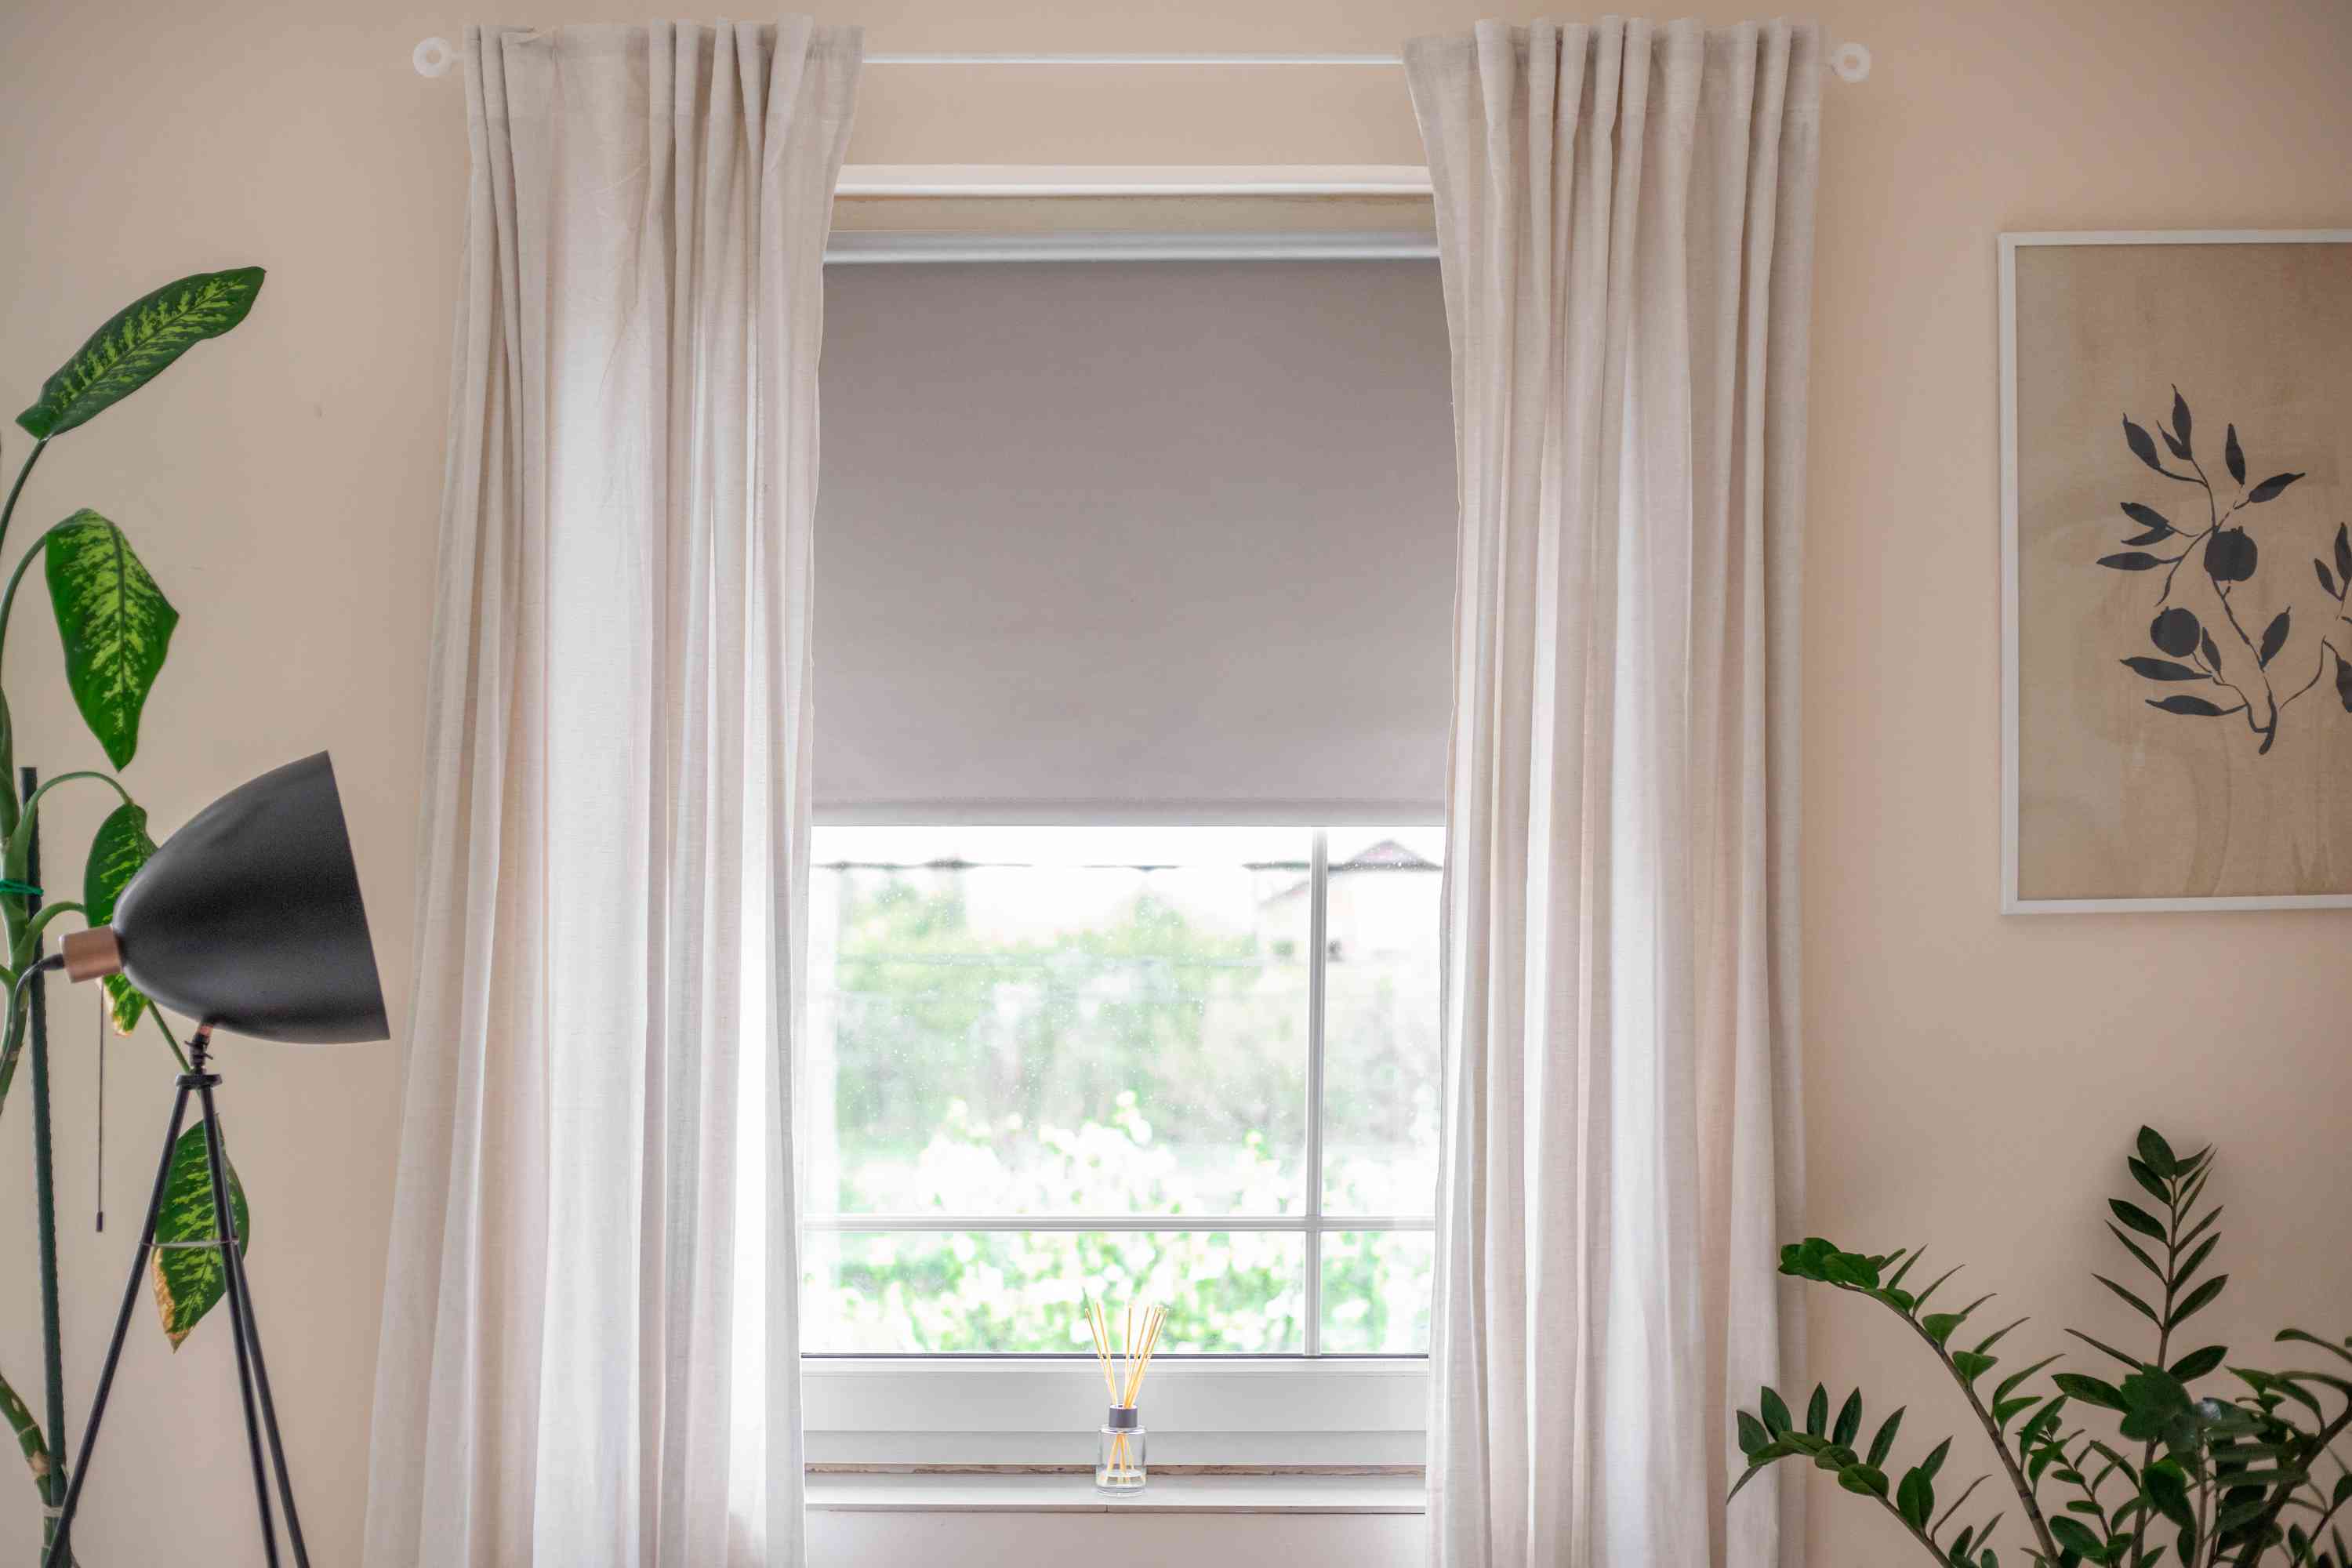 Hang Blinds/Curtains